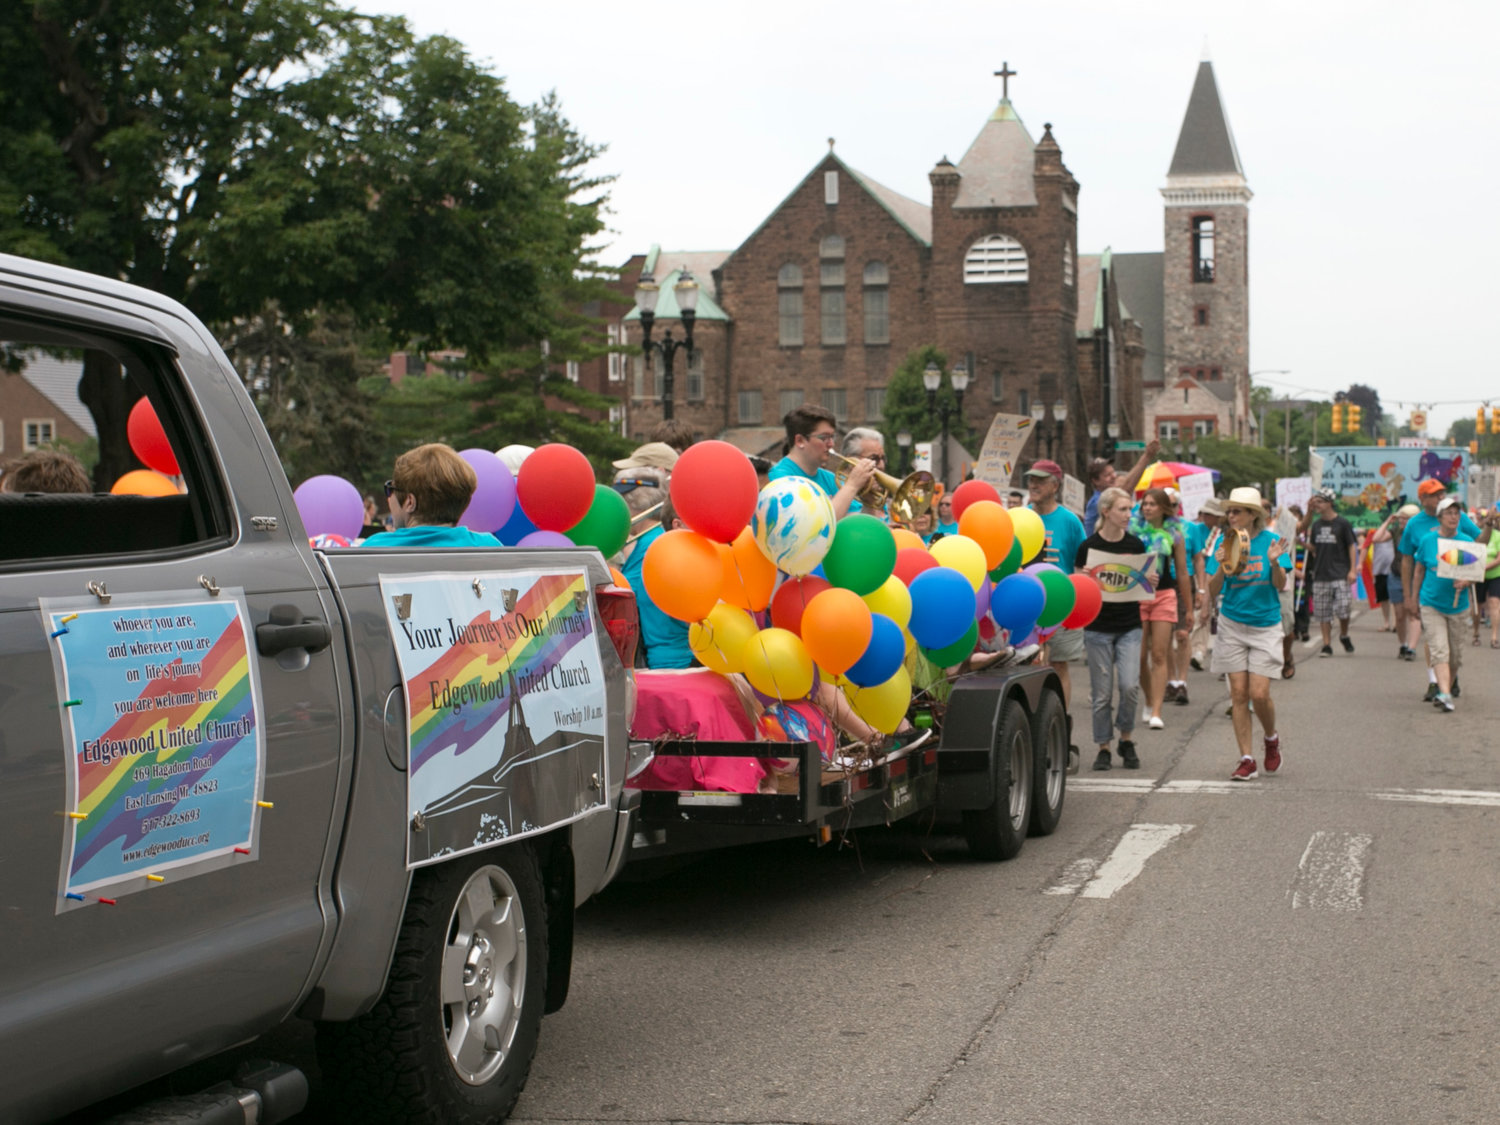 To borrow a phrase, we've come a long way... from 2008 when everyone came to Lansing for MIPRIDE hoisting their cities and regions pink placards to having an out Lesbian Attorney General as Grand Marshal accompanied by churches in the line-up.